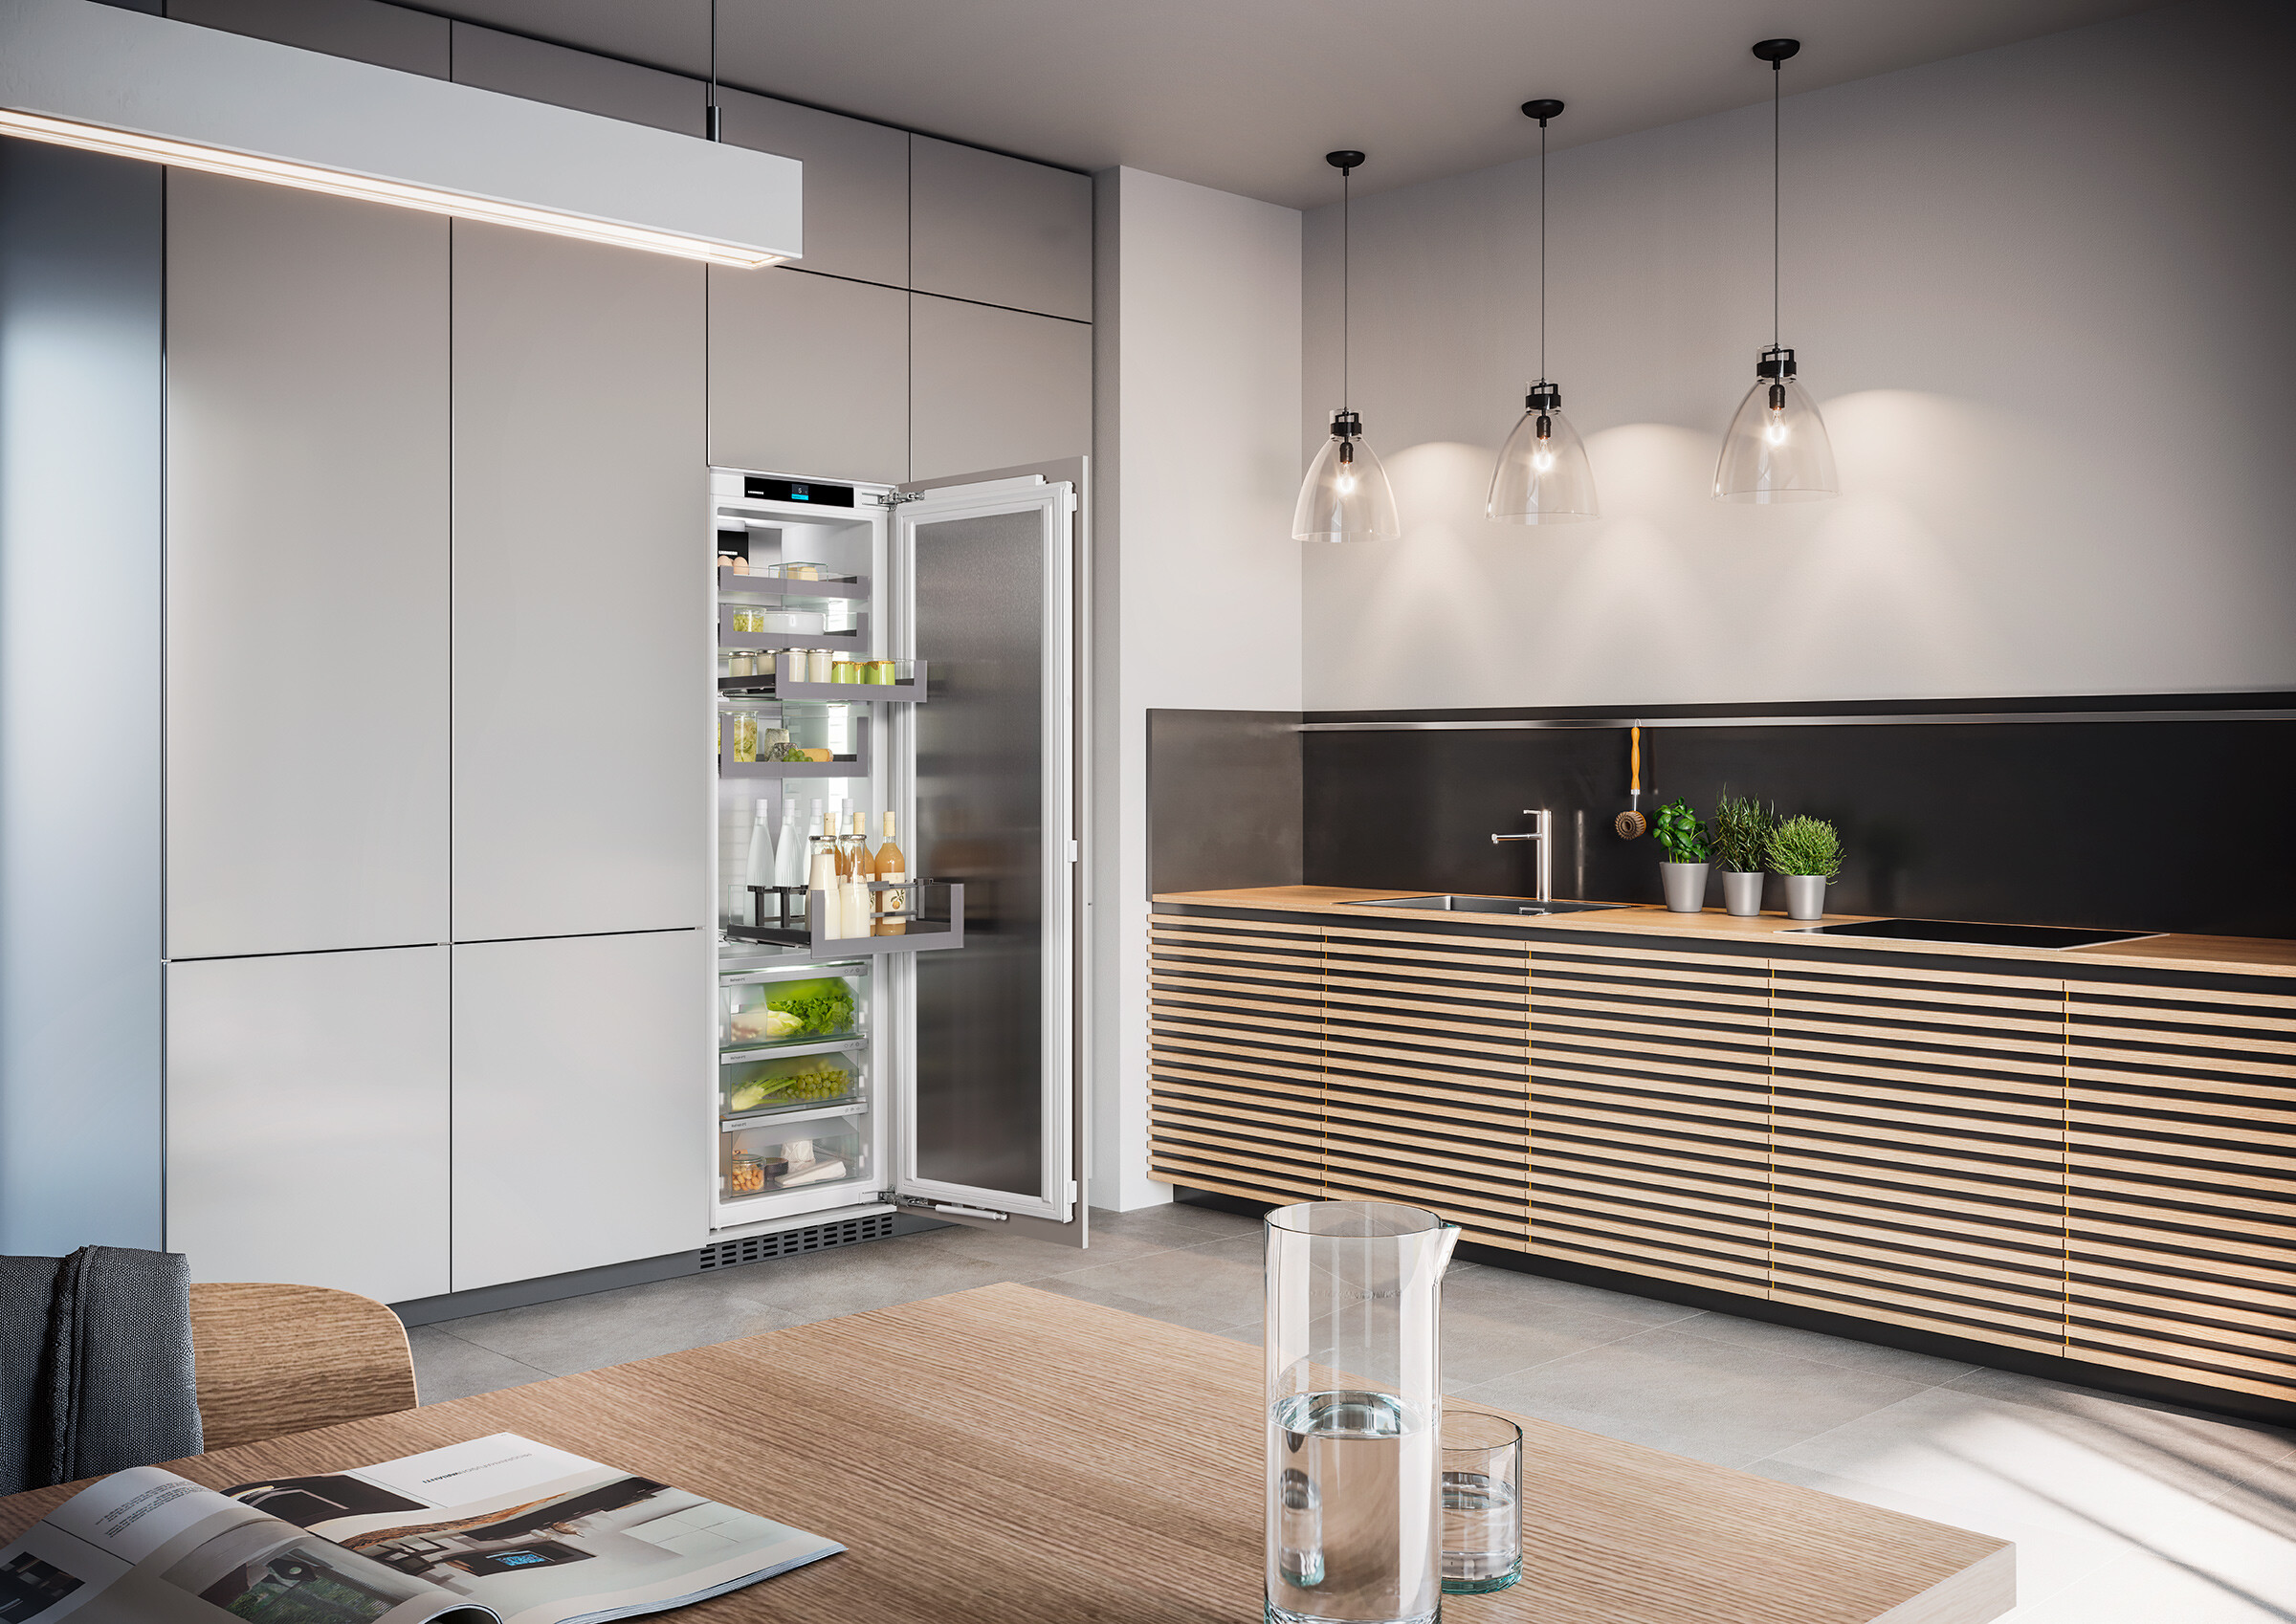 FULLY INTEGRATED FRIDGE WITH OPENSTAGE & BIOFRESH IRBPh 5170